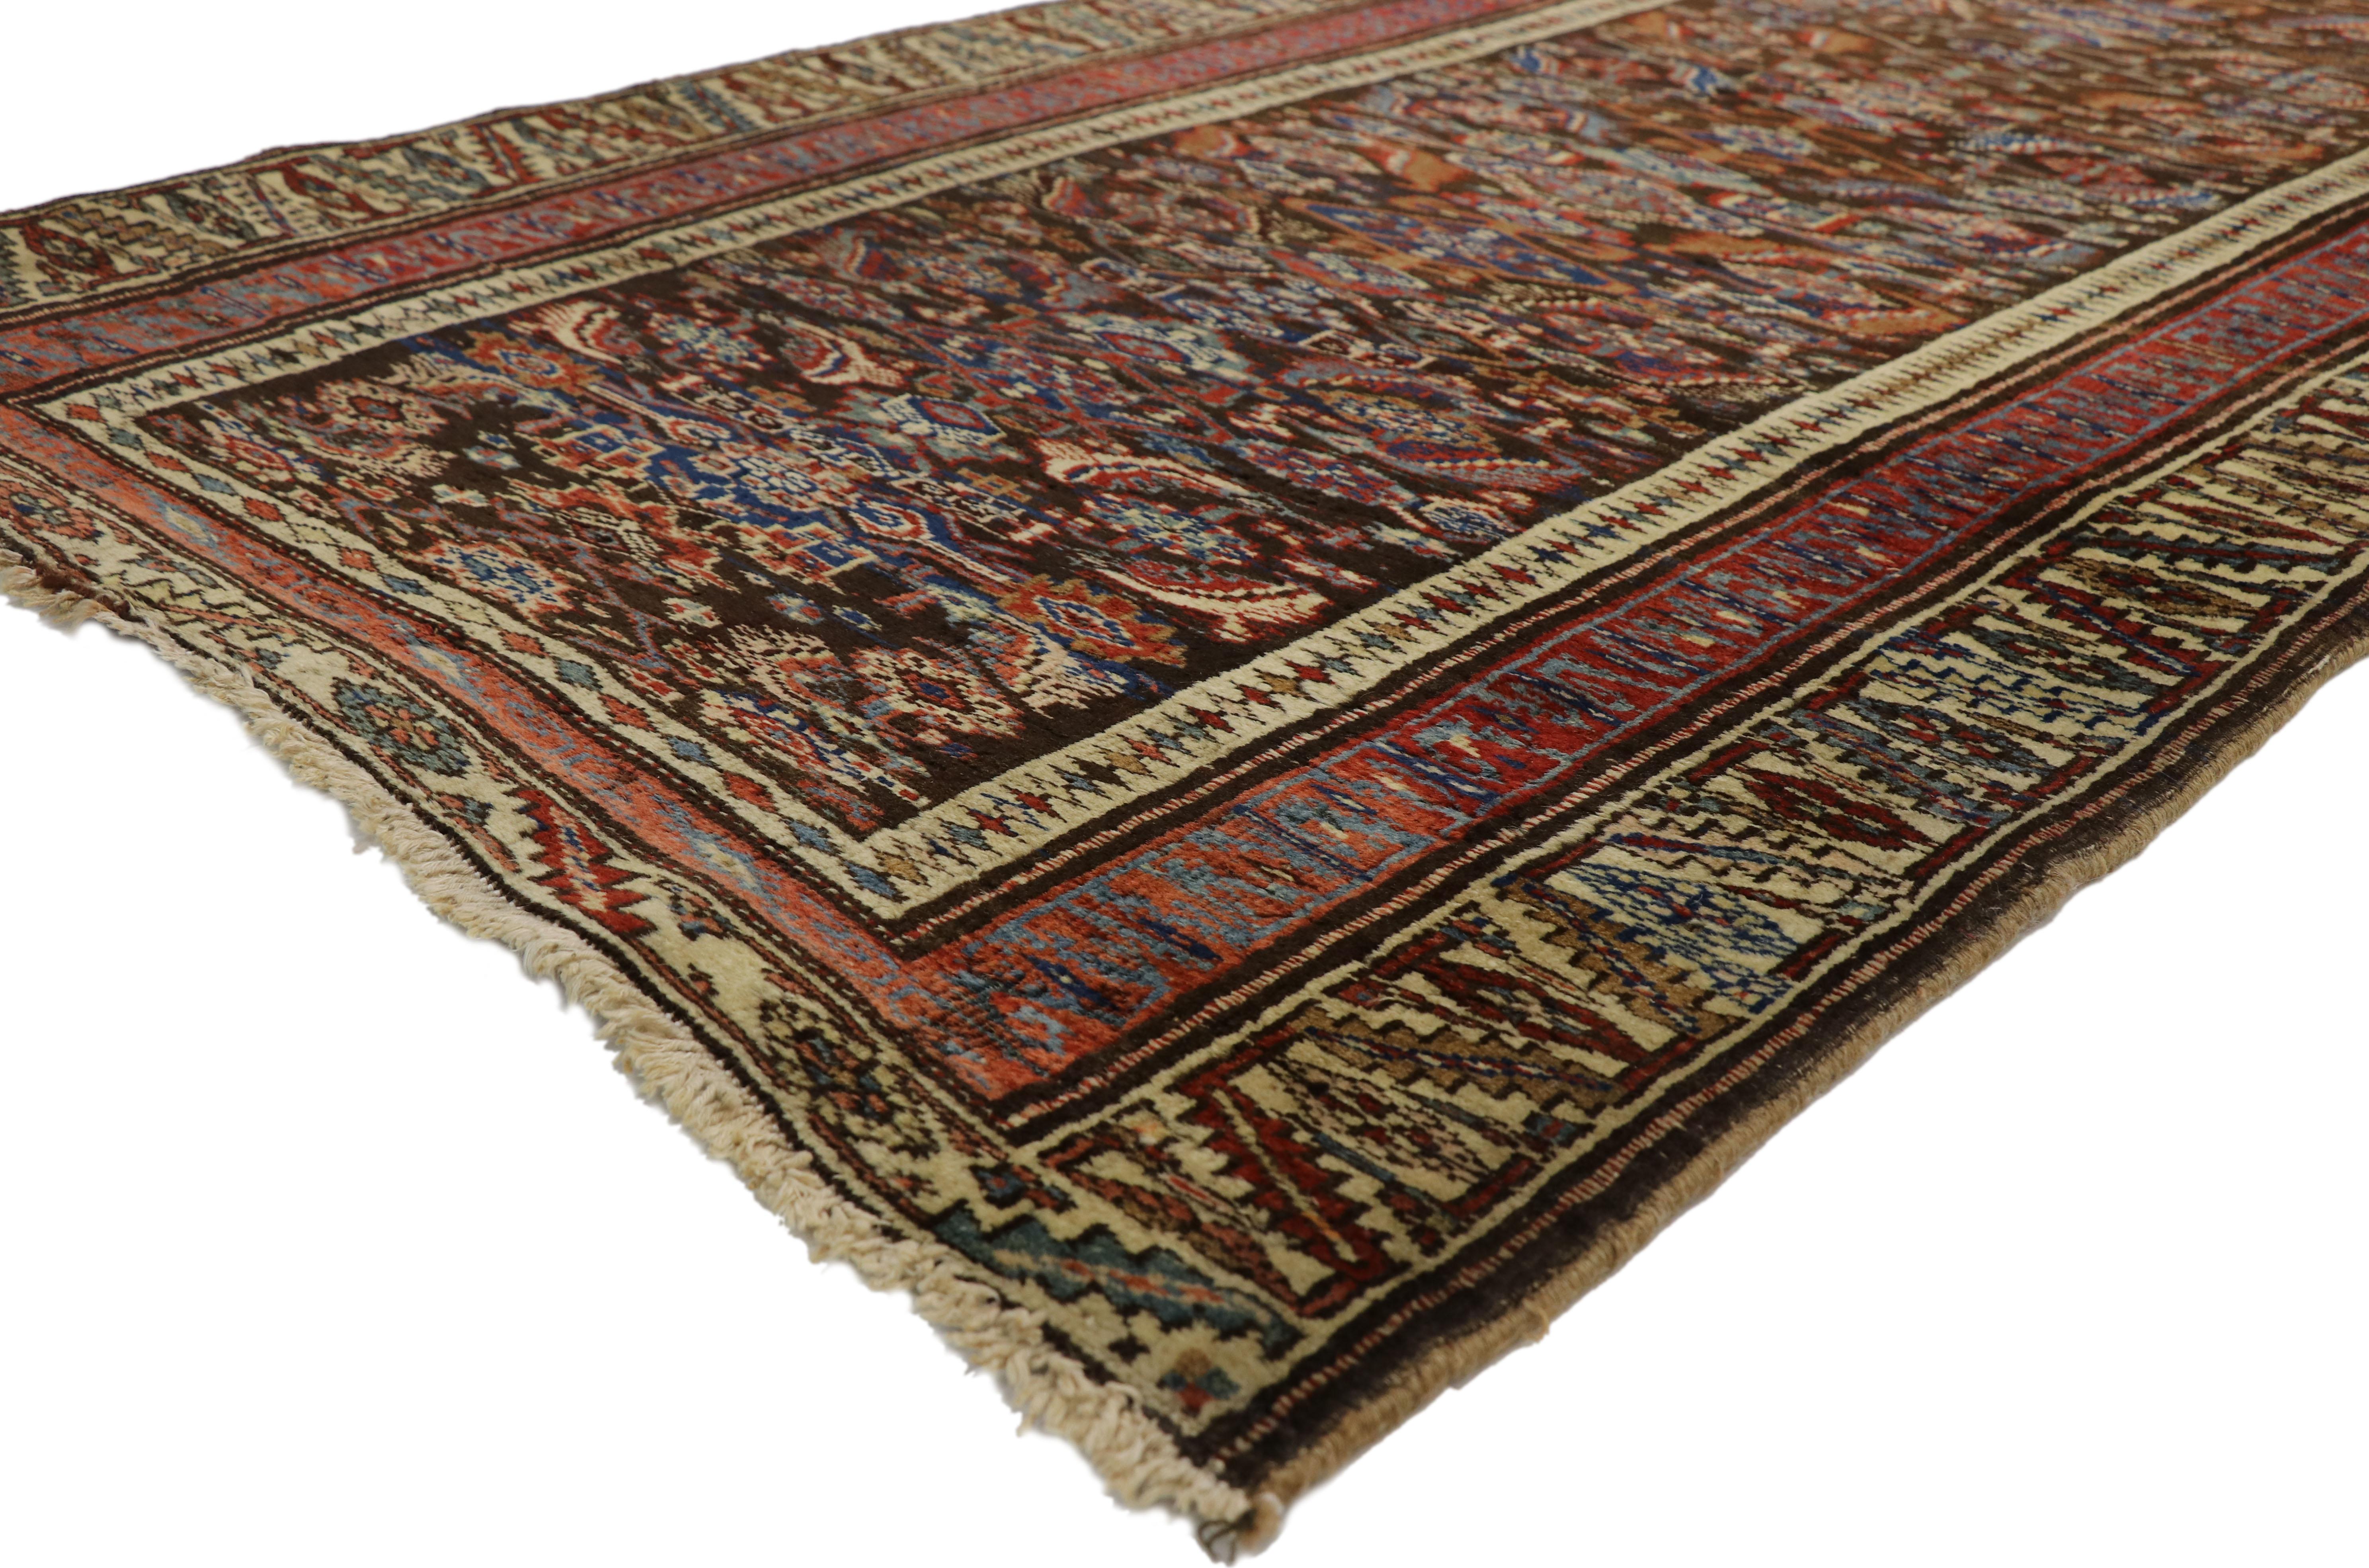 Late 19th Century Antique Persian Bijar Runner, Tribal Style Hallway Runner In Good Condition For Sale In Dallas, TX